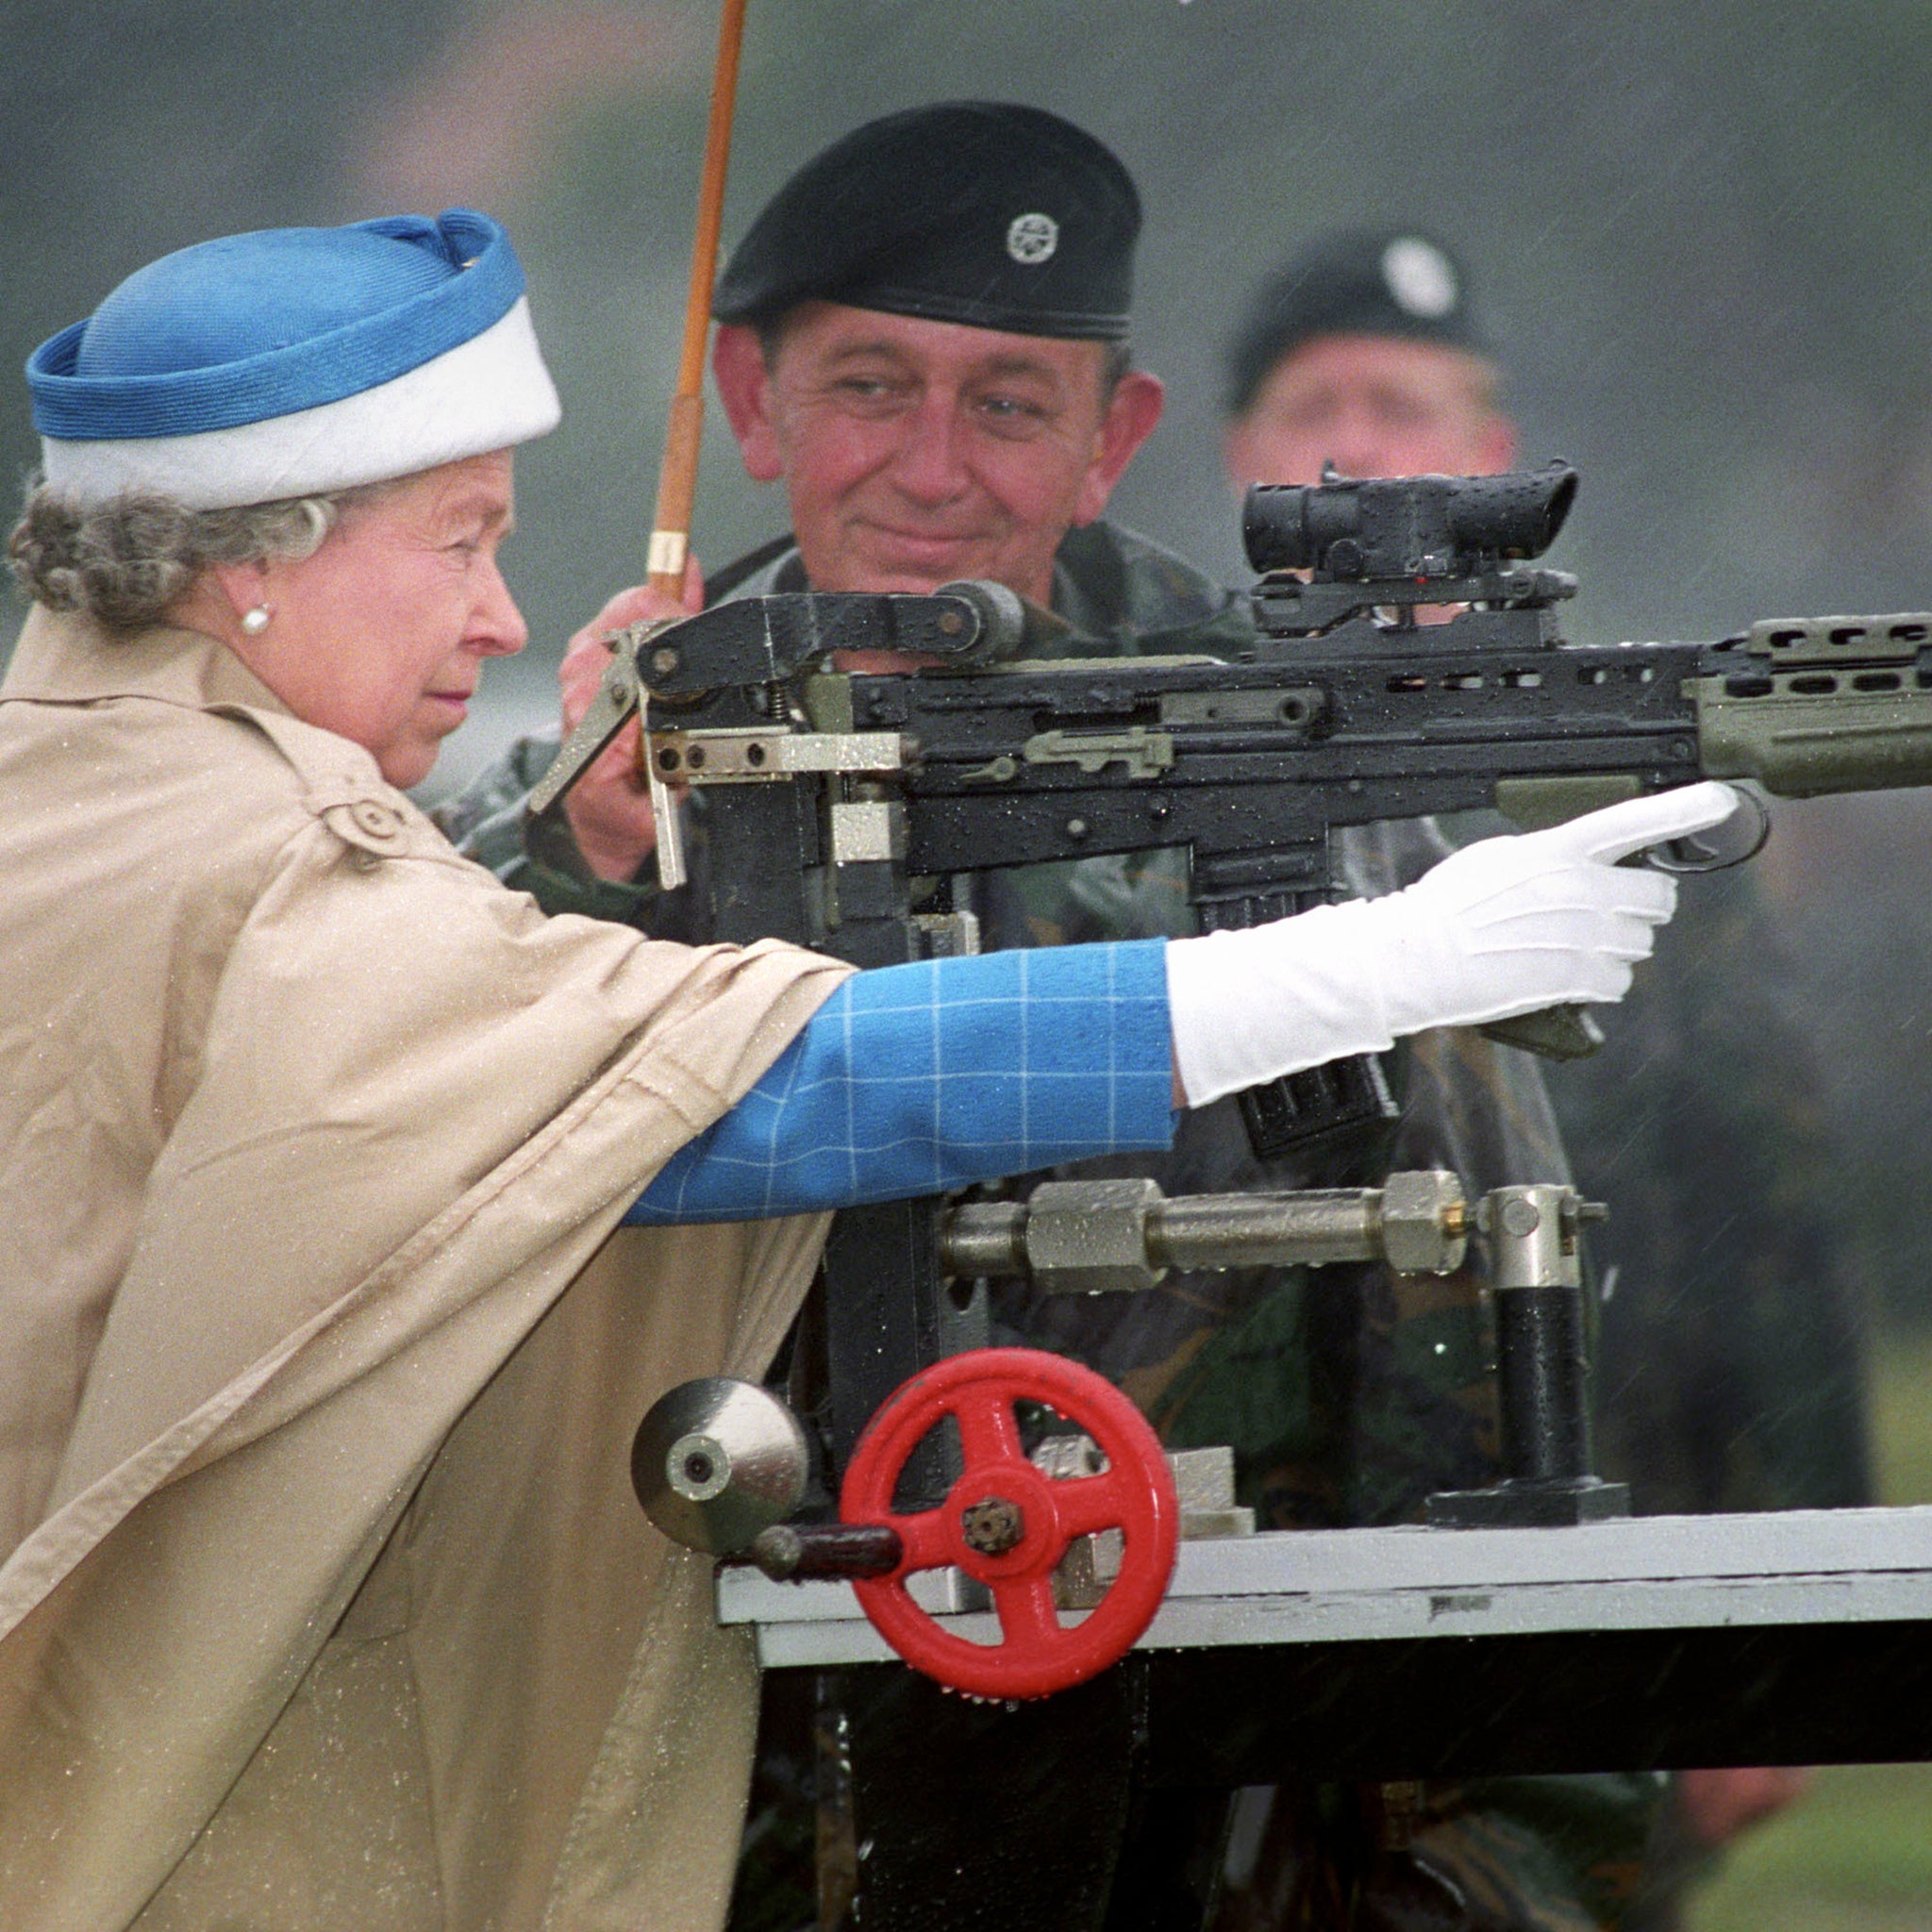 Queen Elizabeth II, with Chief Instructor, Small Arms Corp LT Col George Harvey, firing the last shot on a standard SA 80 rifle when she attended the centenary of the Army Rifle Association at Bisley, 1993